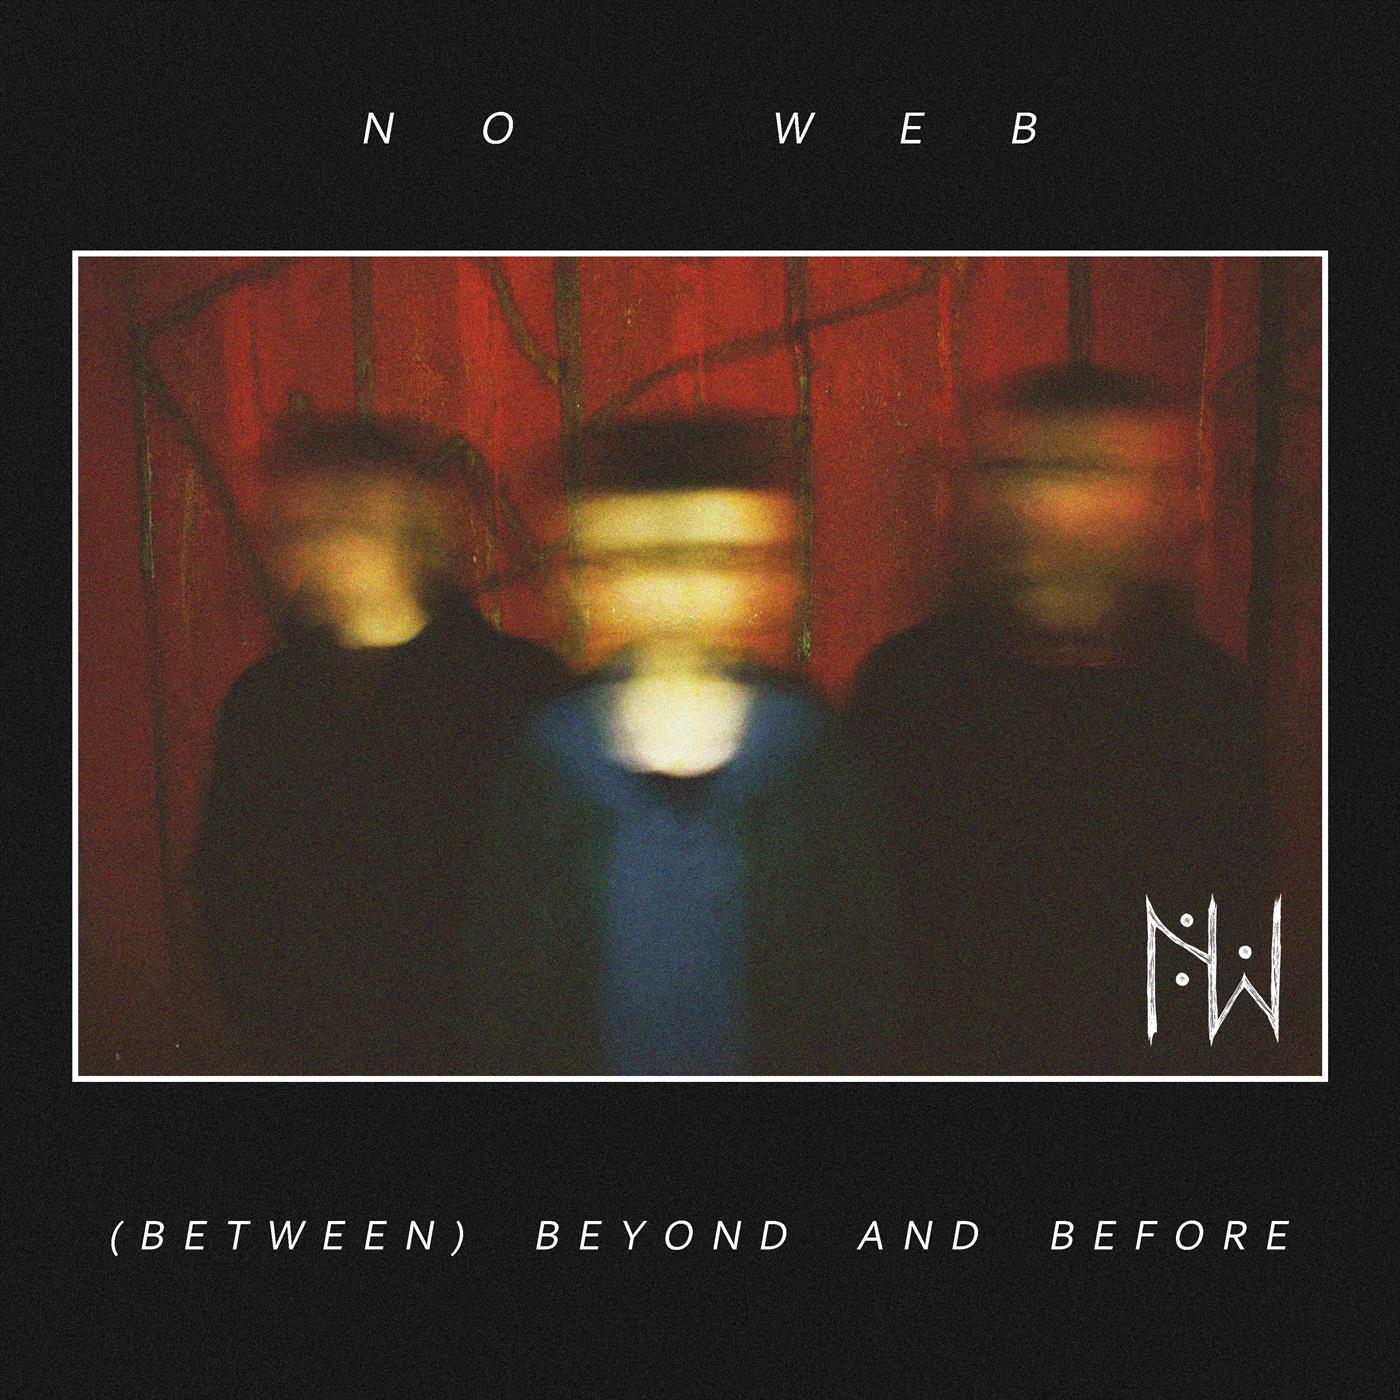 (Between) Beyond and Before